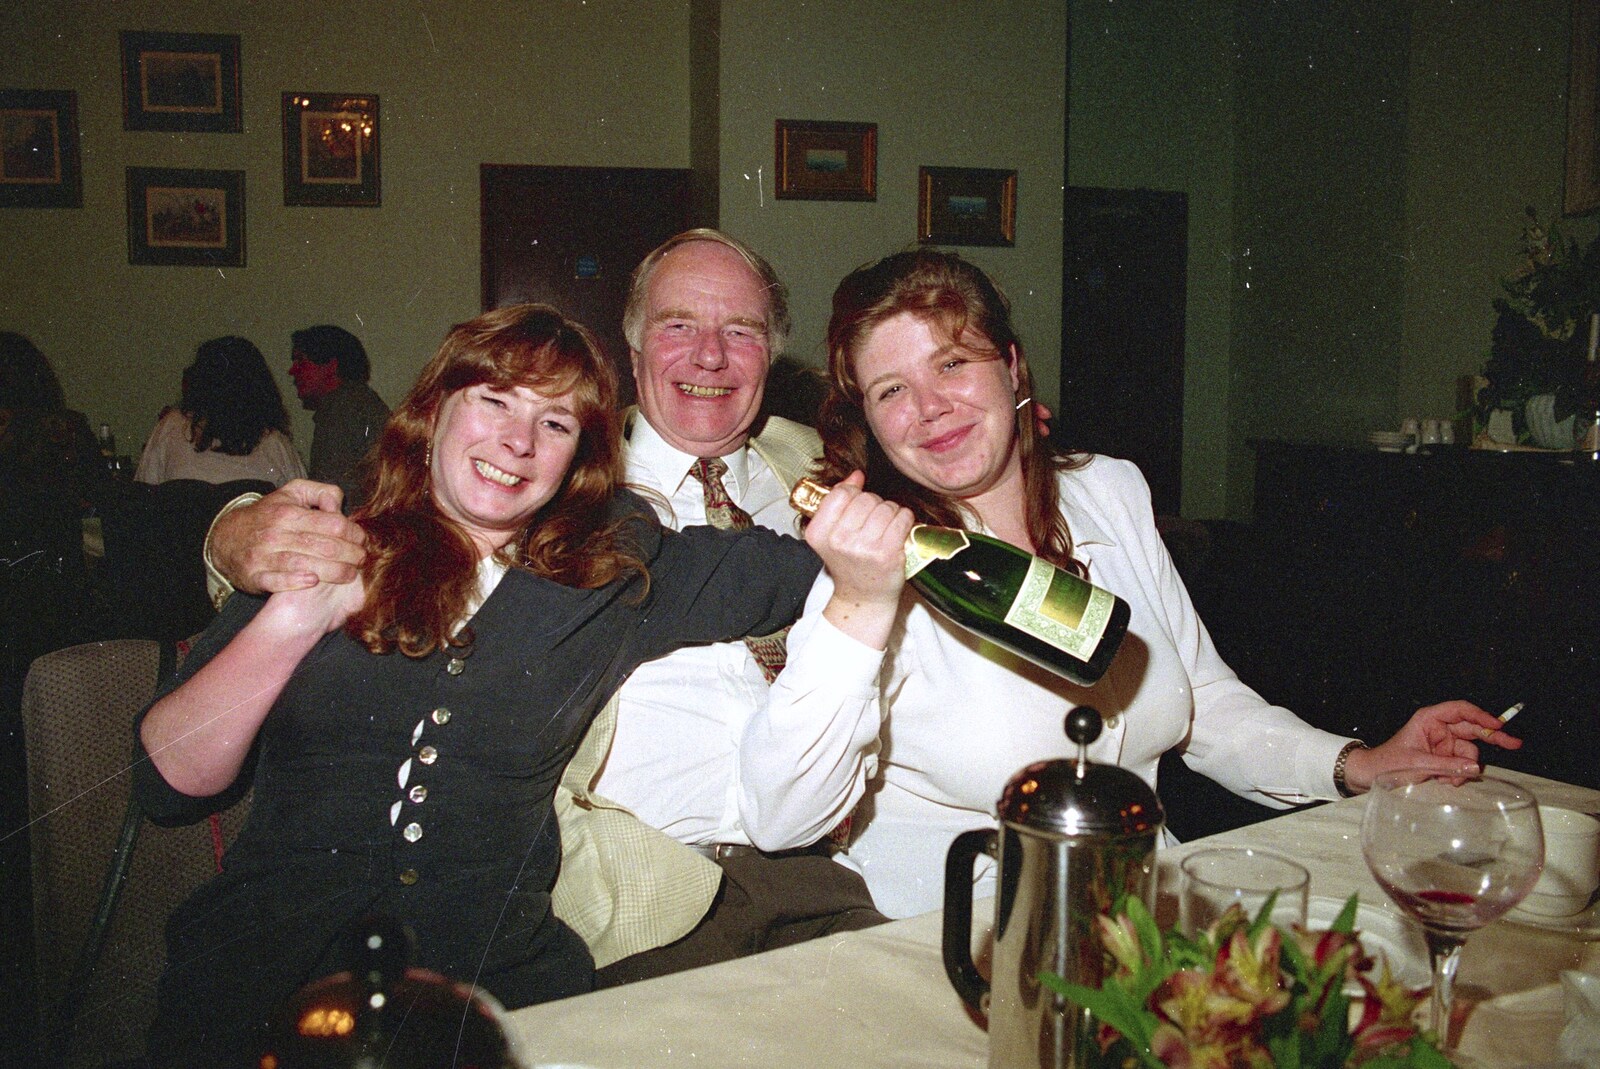 Sis Graduates from De Montfort, Leicester, Leicestershire - 9th August 1997: Mel, Dad and Sis in a Leicester restaurant